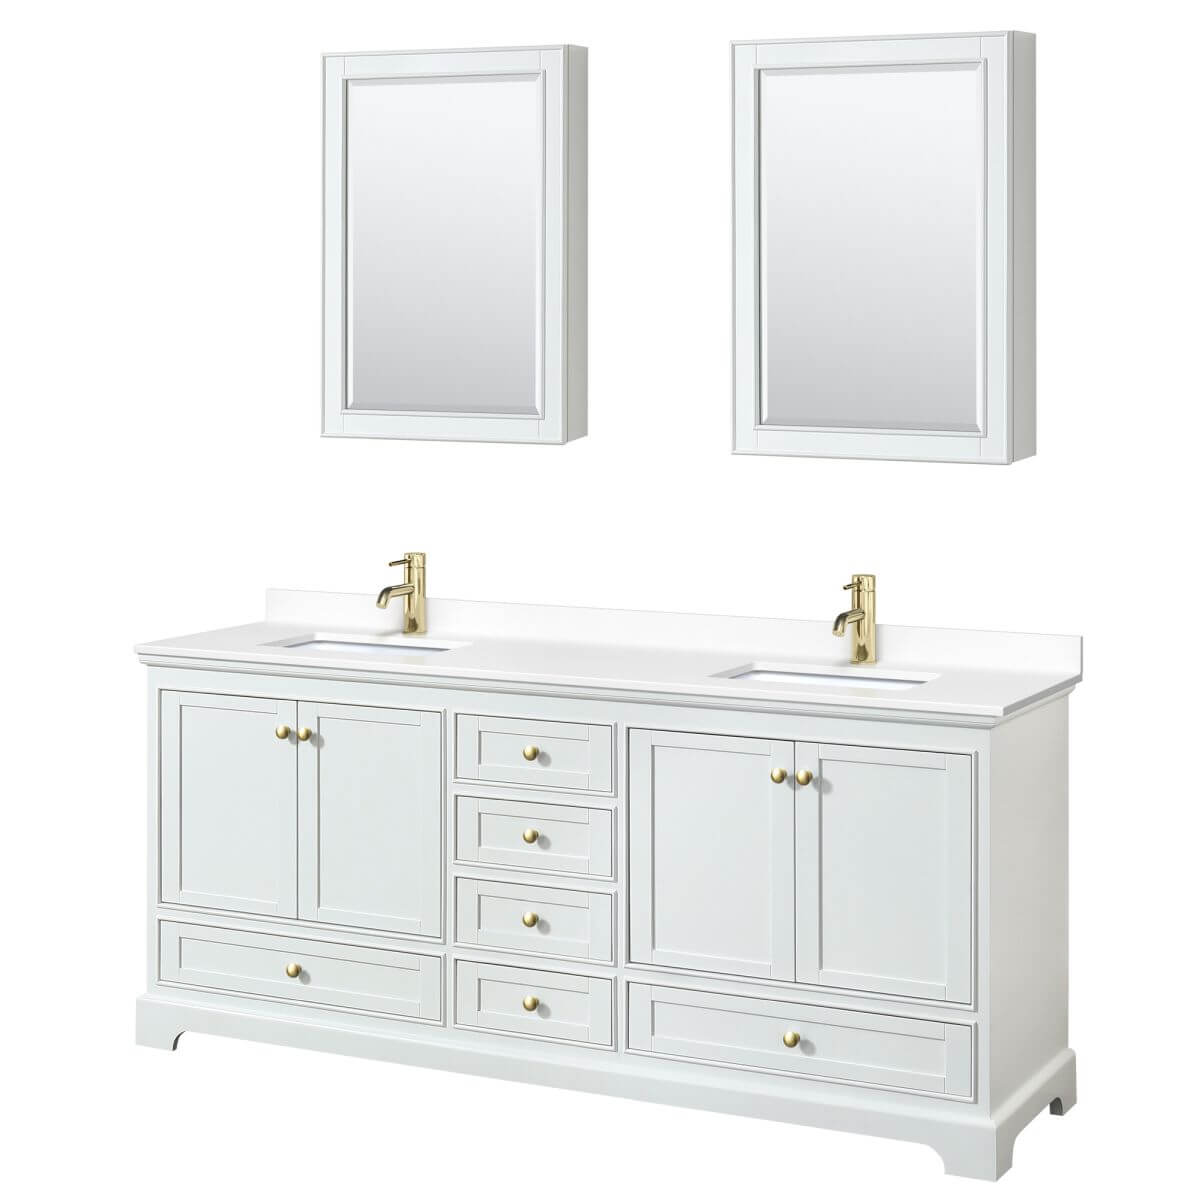 Wyndham Collection Deborah 80 inch Double Bathroom Vanity in White with White Cultured Marble Countertop, Undermount Square Sinks, Brushed Gold Trim and Medicine Cabinets - WCS202080DWGWCUNSMED